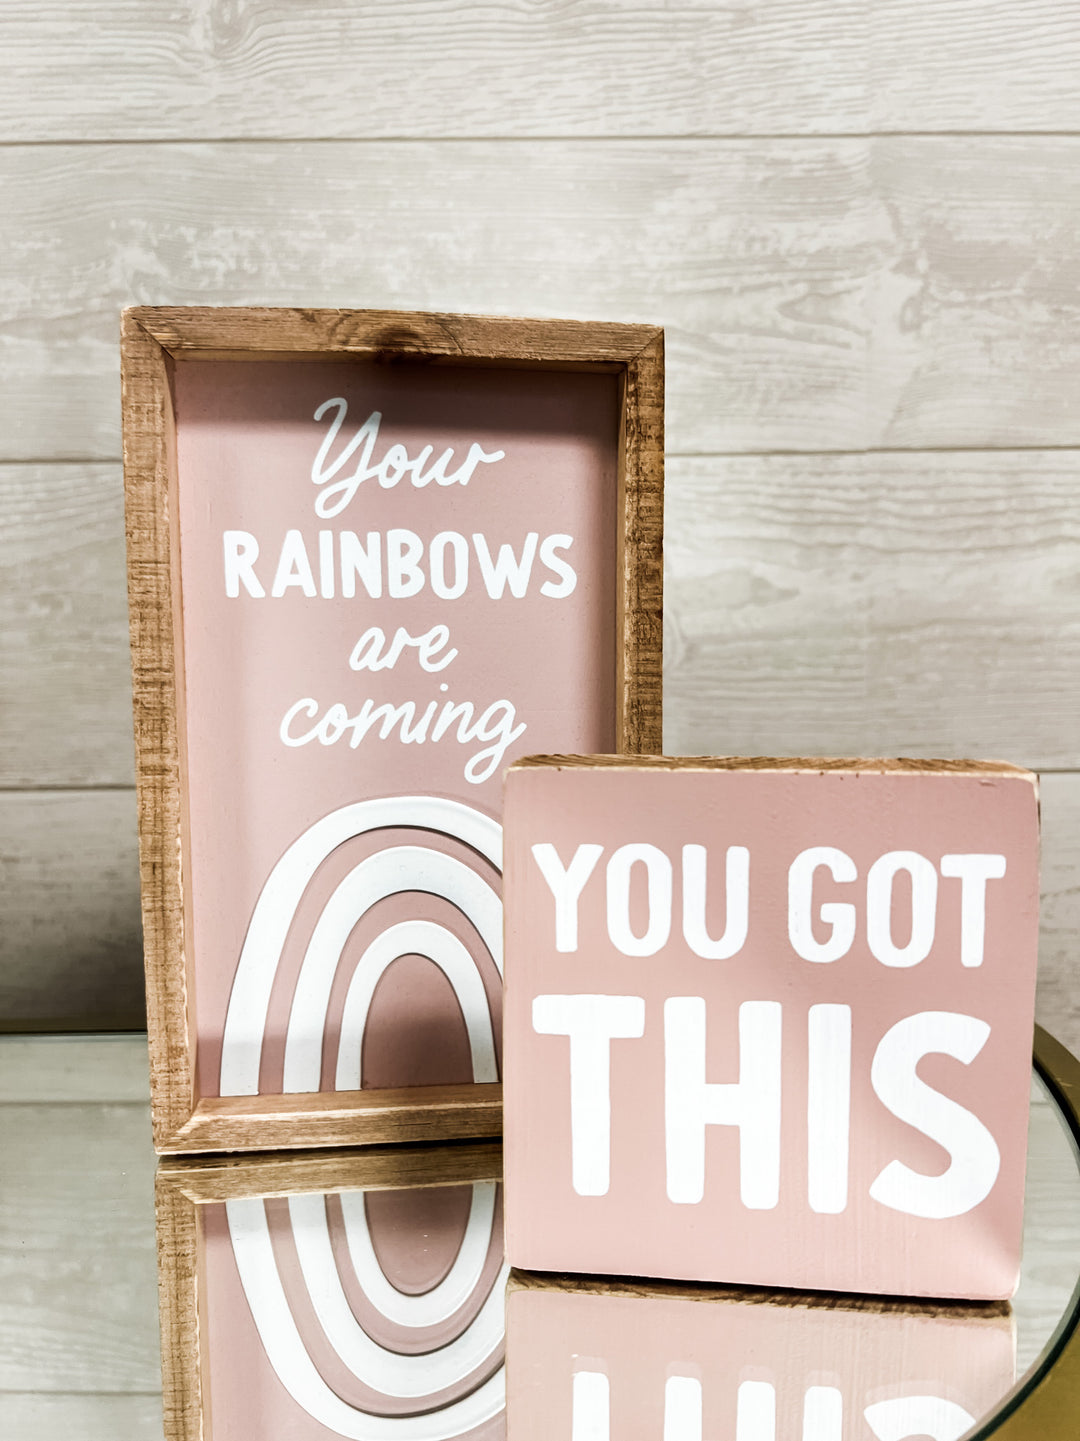 Rainbows Are Coming - The Teal Antler Boutique